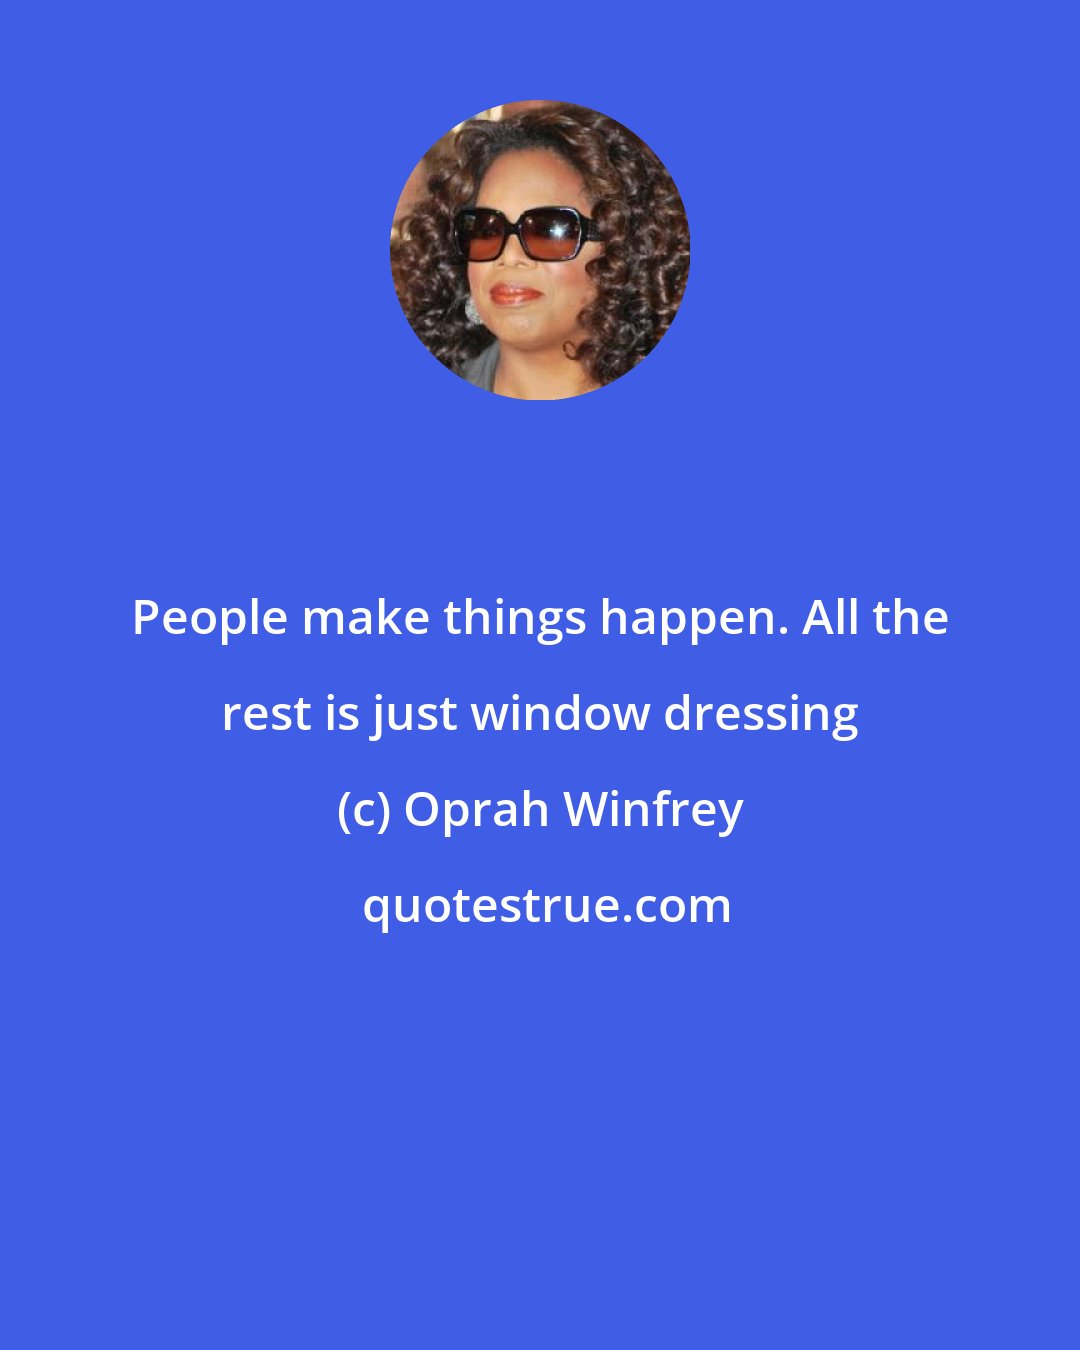 Oprah Winfrey: People make things happen. All the rest is just window dressing